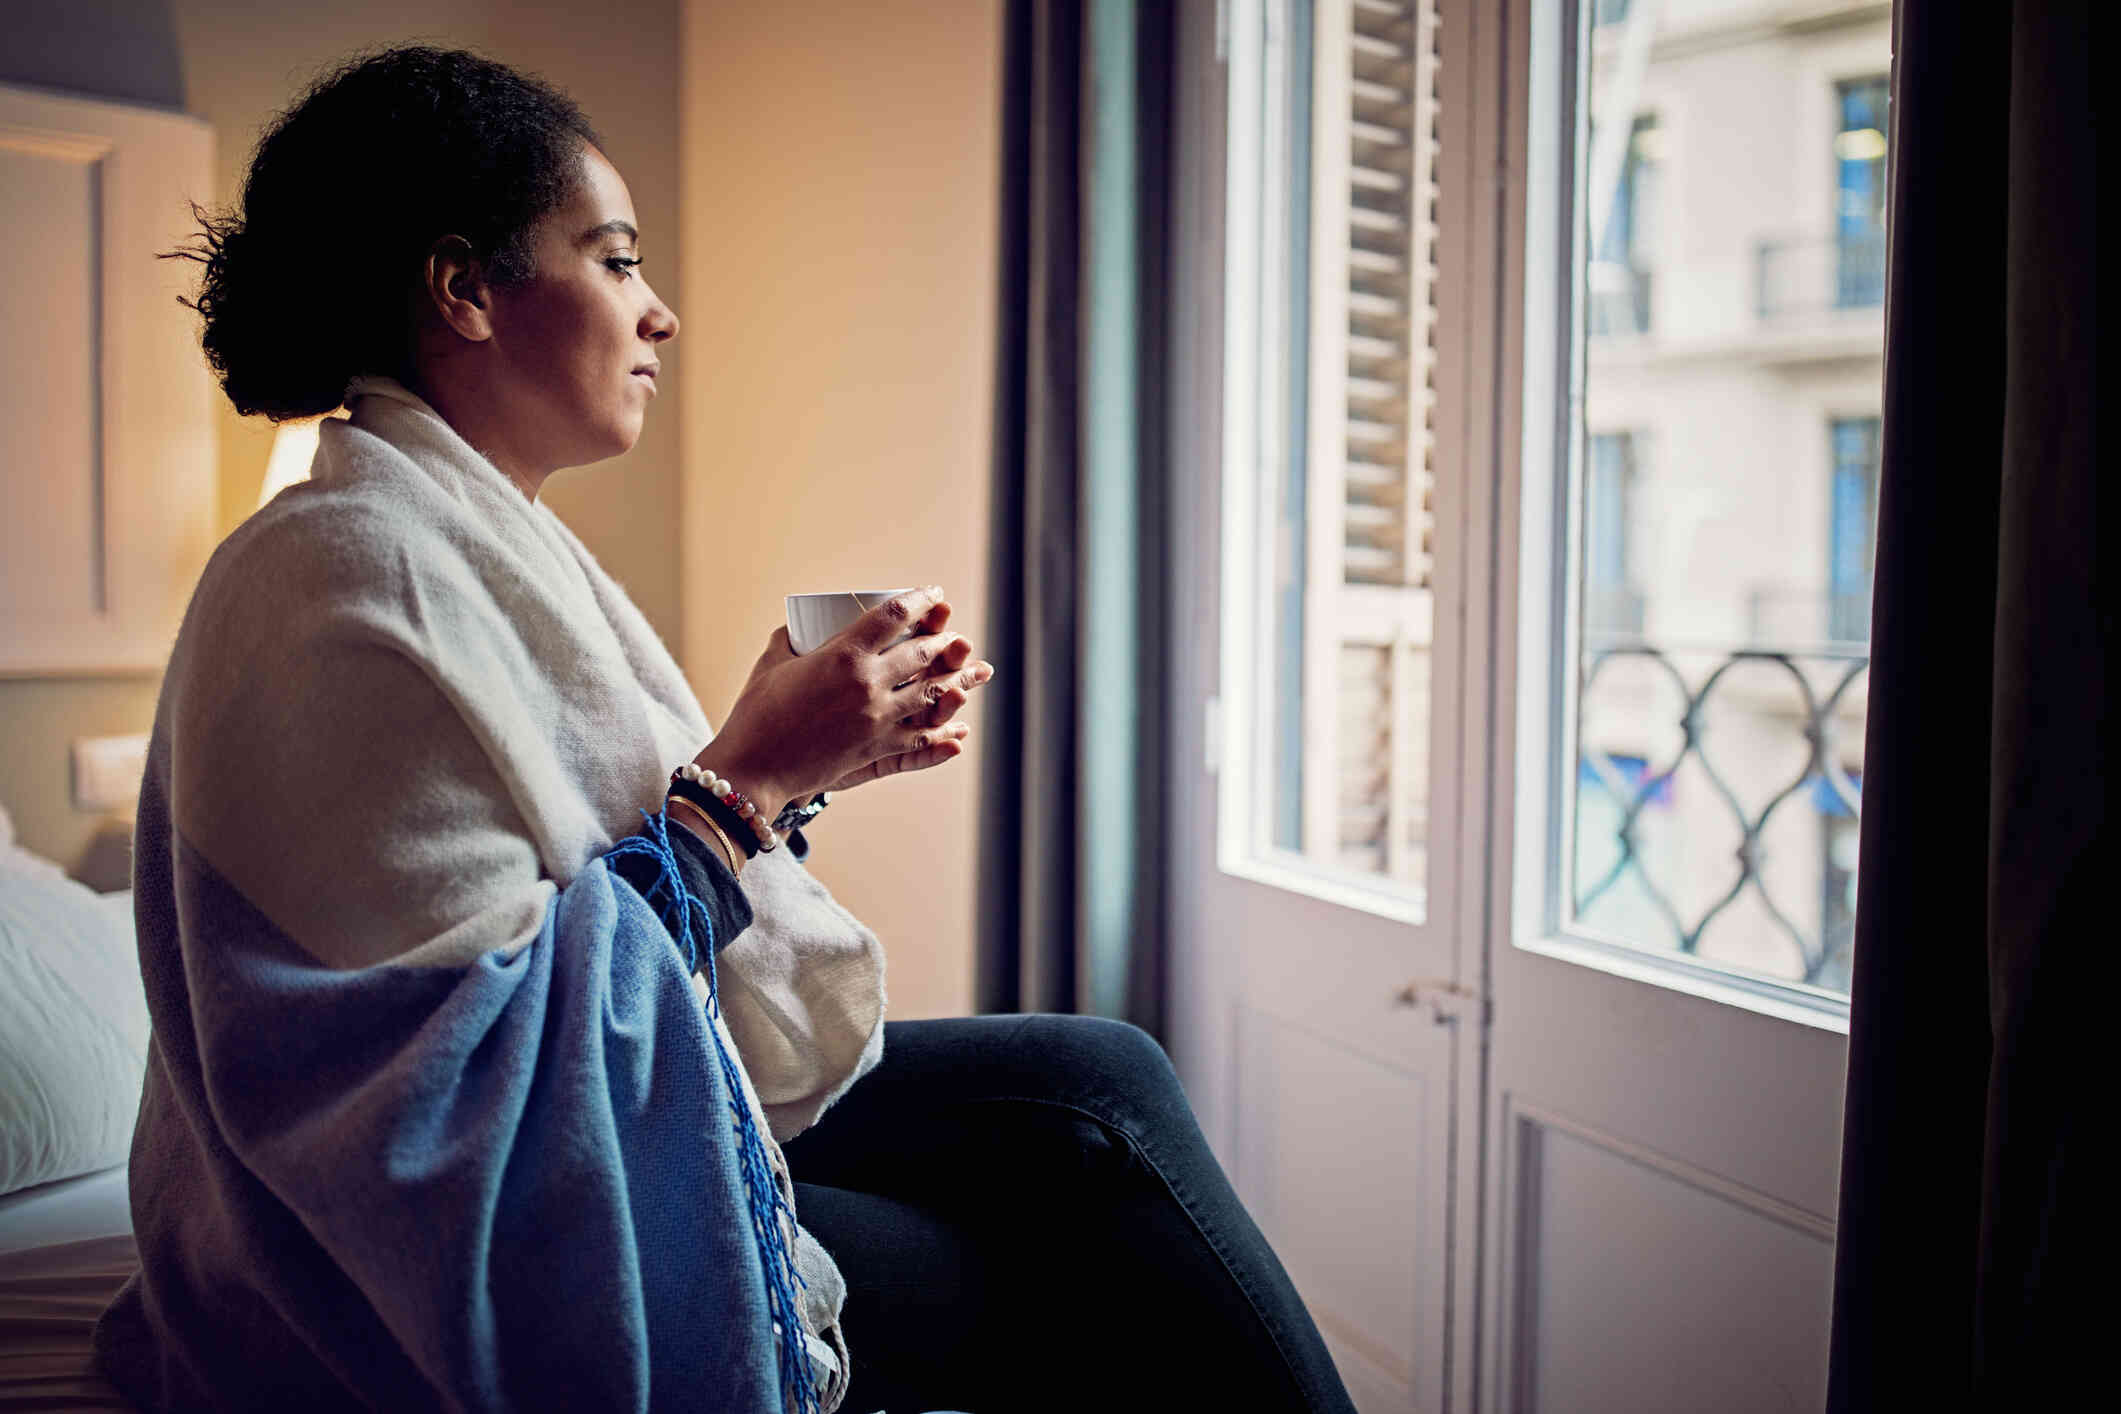 A woman in a large scarf holds a cup of tea while gazing out of the window of her home.